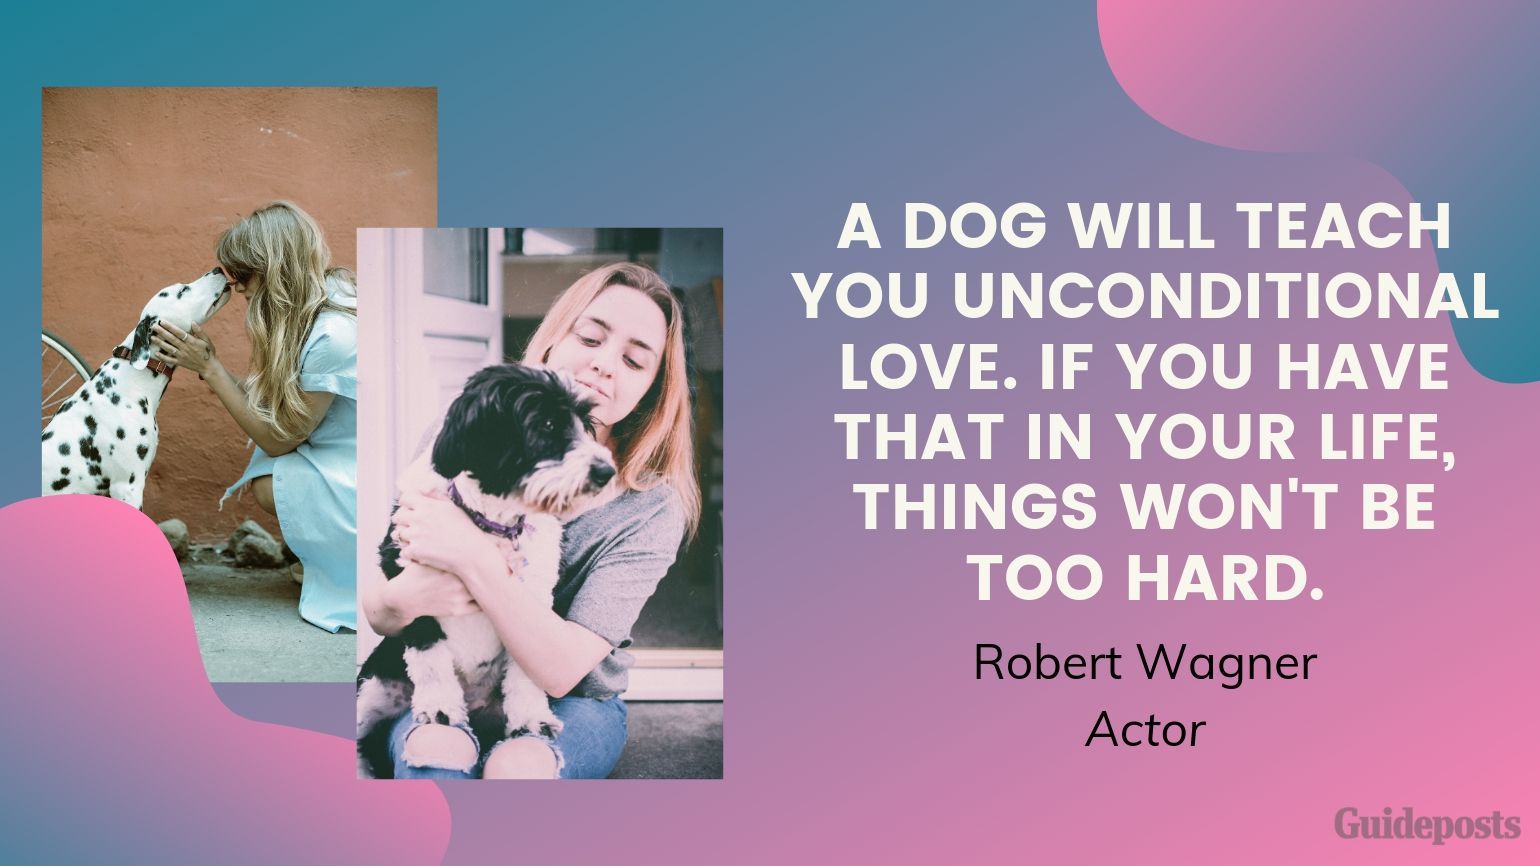 Sentimental Dog Quote: A dog will teach you unconditional love. If you have that in your life, things won't be too hard. —Robert Wagner, Actor dog lover